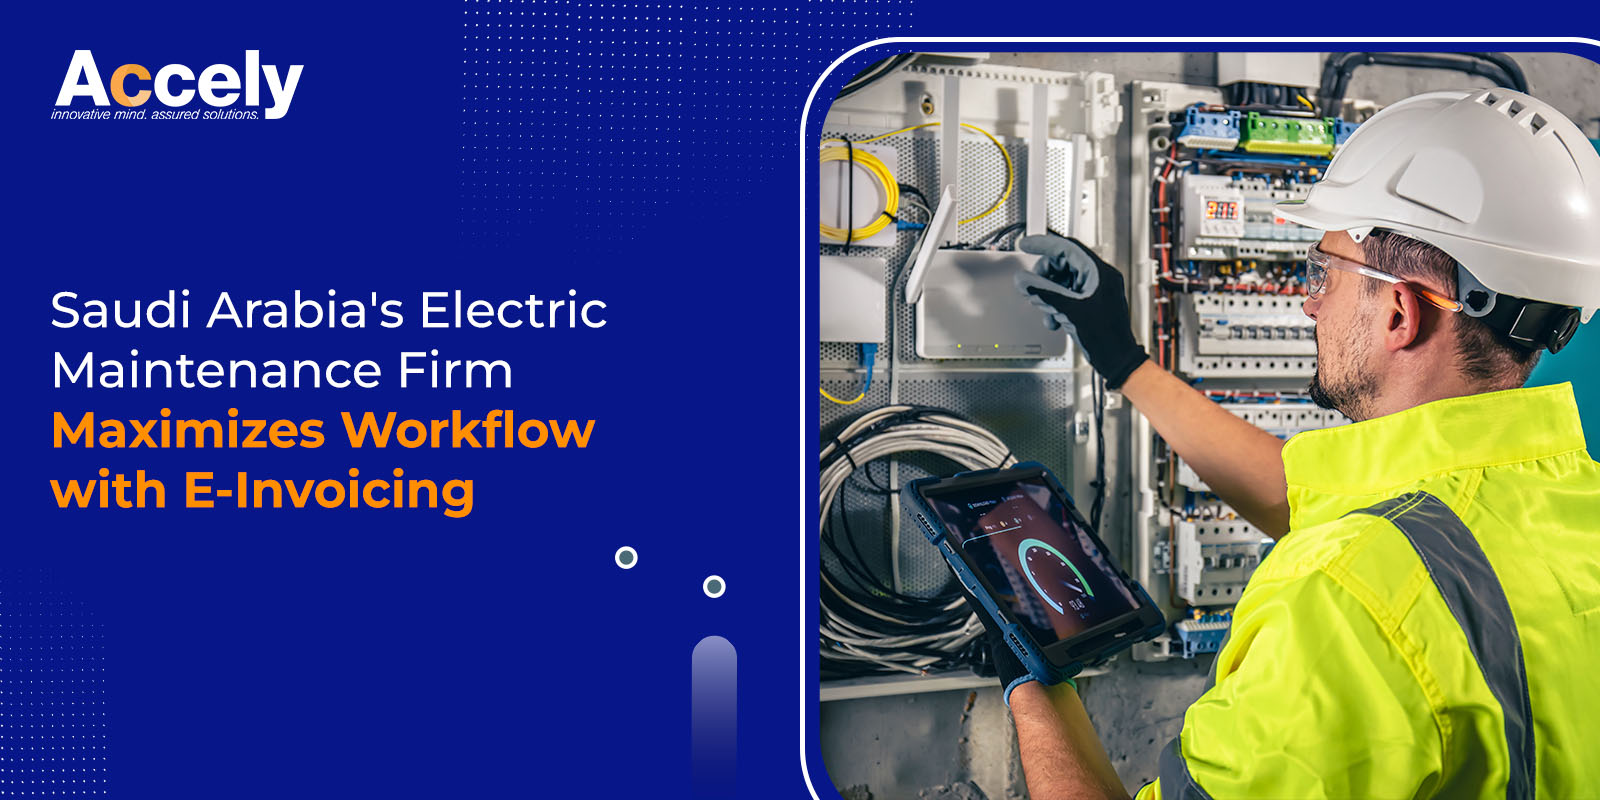 Saudi Arabia's Electric Maintenance Firm Maximizes Workflow with E-Invoicing